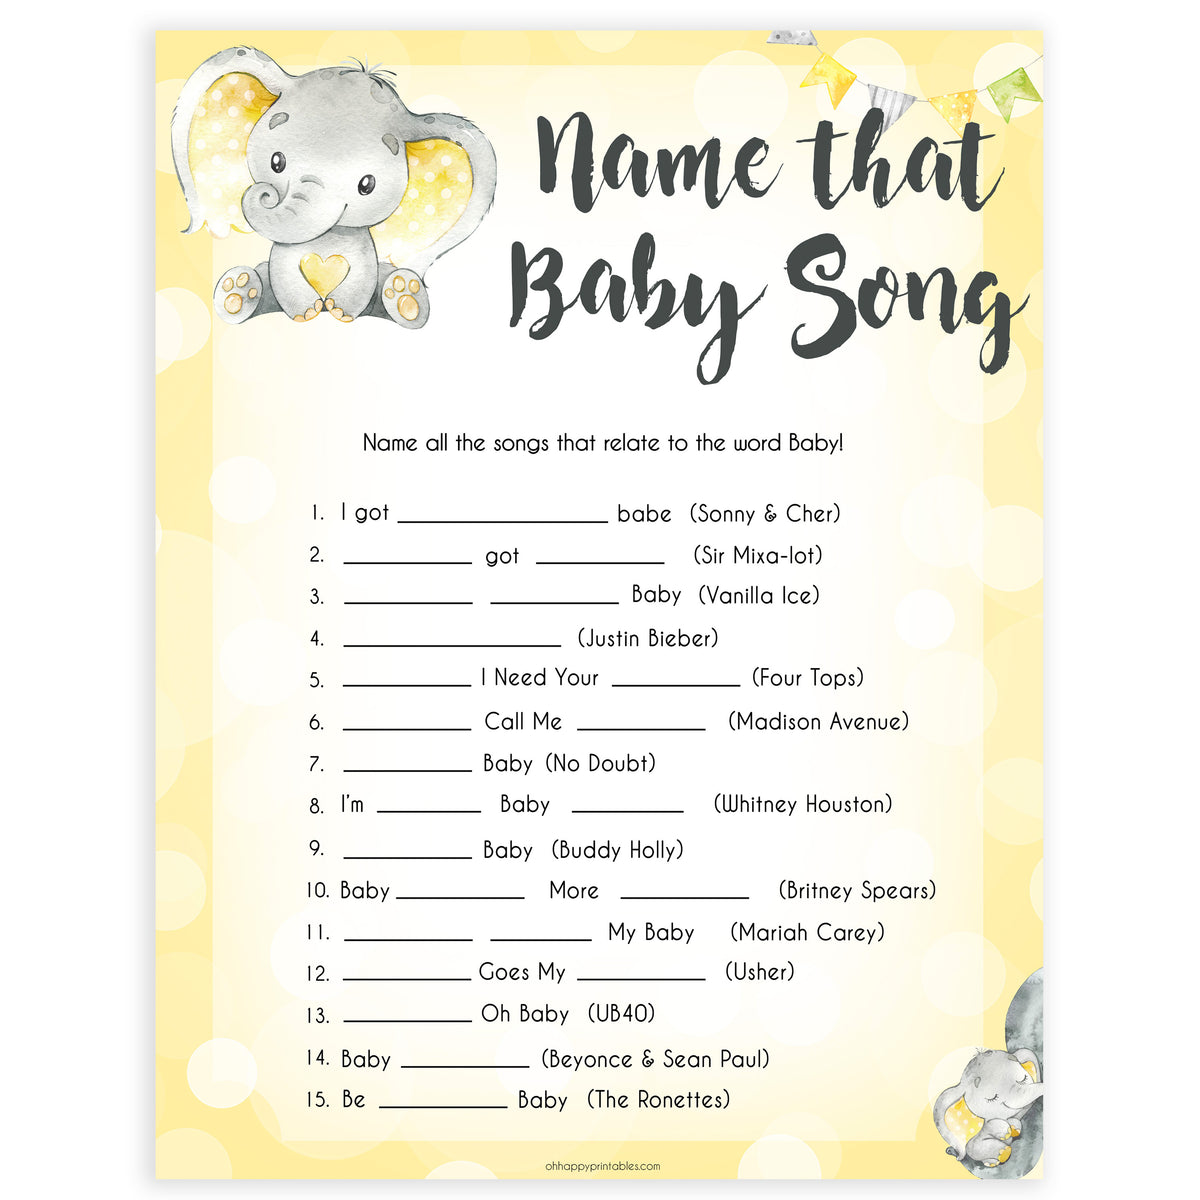 yellow elephant baby games, name that baby song baby games, yellow baby games, elephant baby shower, fun baby games, top 10 baby games, popular baby games, printable baby games